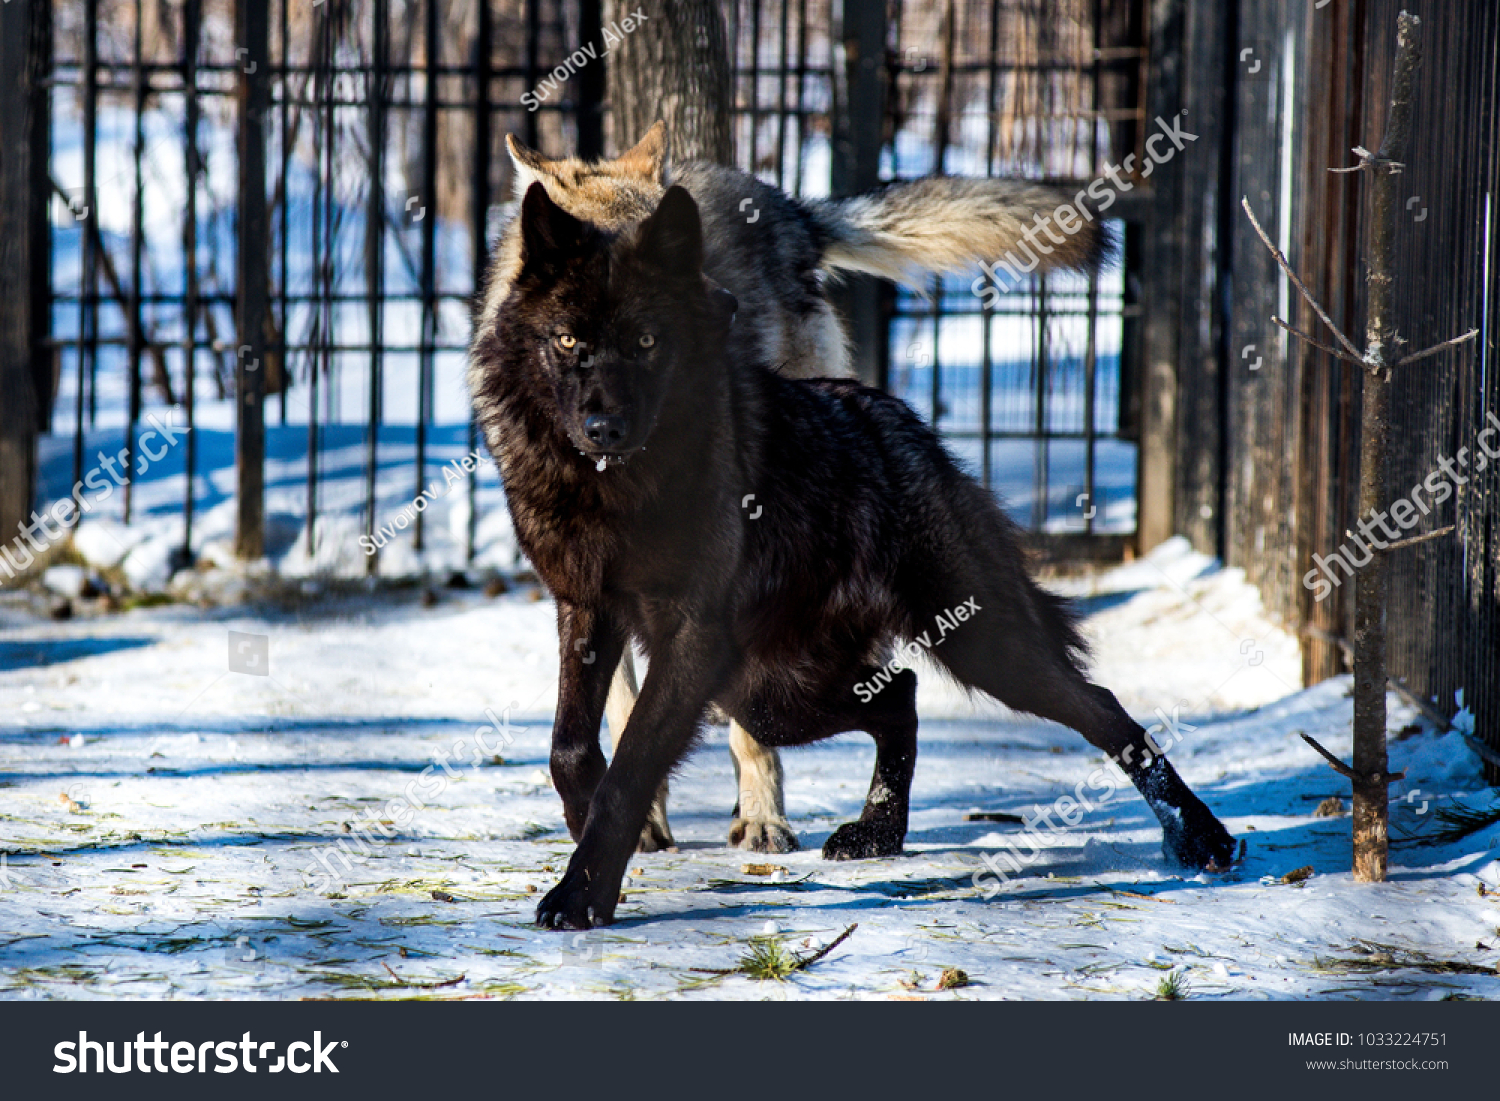 black wolf in the snow in a cage #1033224751